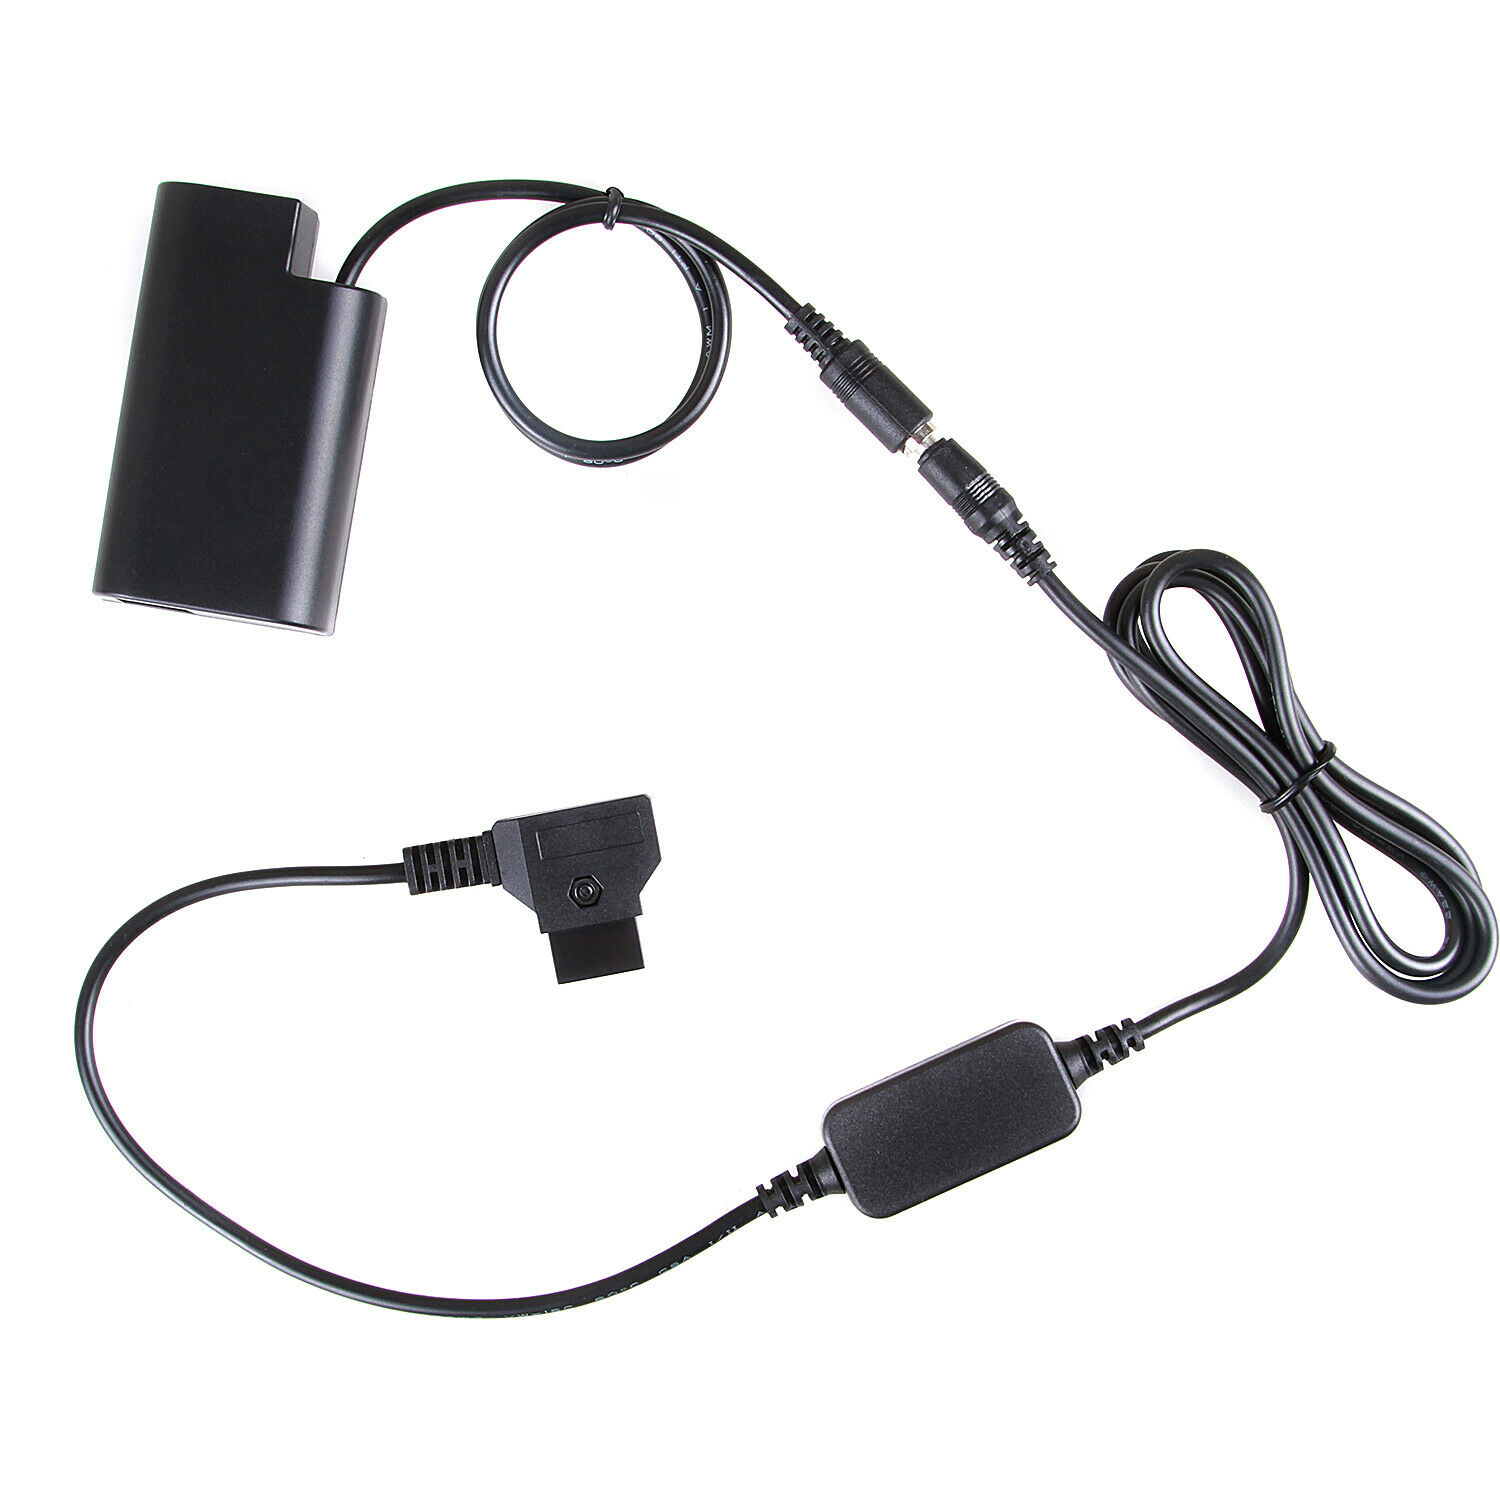 Fotga Power Adapter Cable for D-tap Connector to DMW-BLJ31 Dummy Battery  for Powering Panasonic Lumix S Series Camera DC-S1HGK-K DC-S1RMGK-K